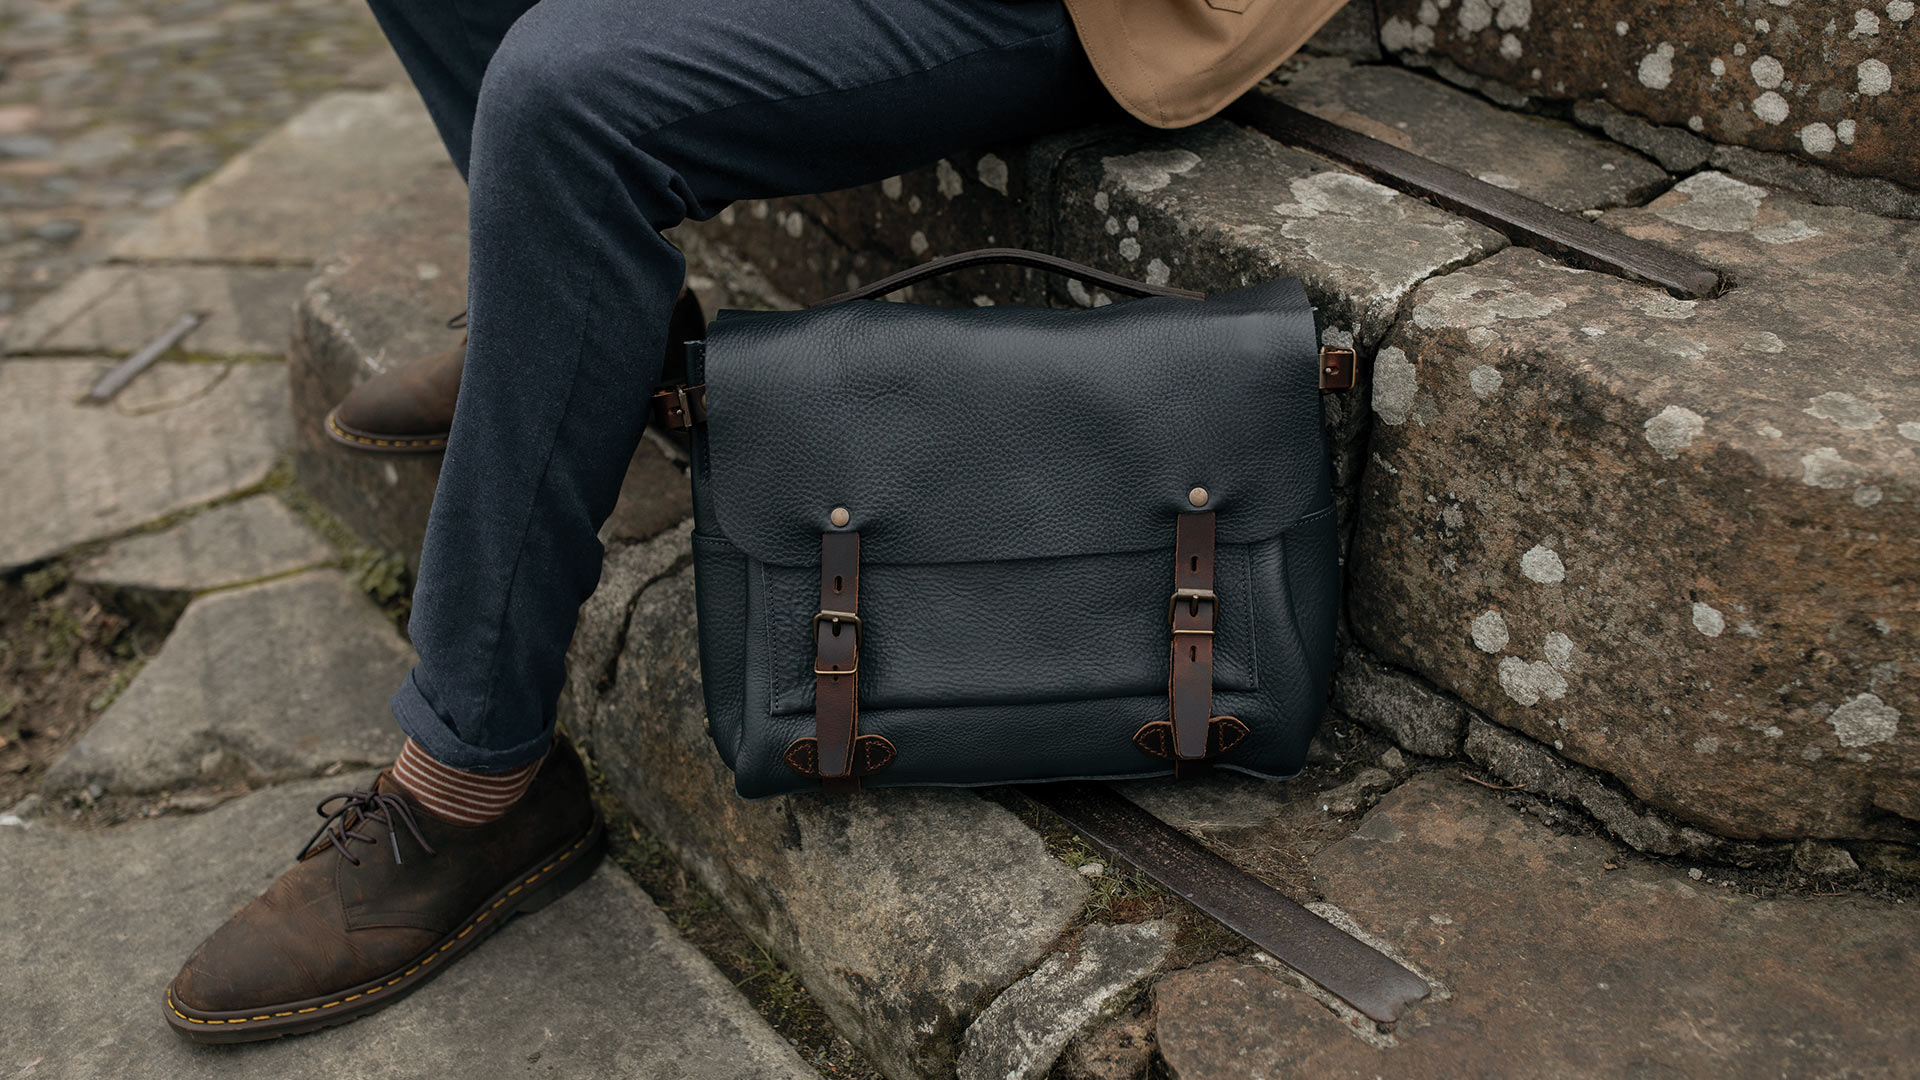 Discover all the postman's bags